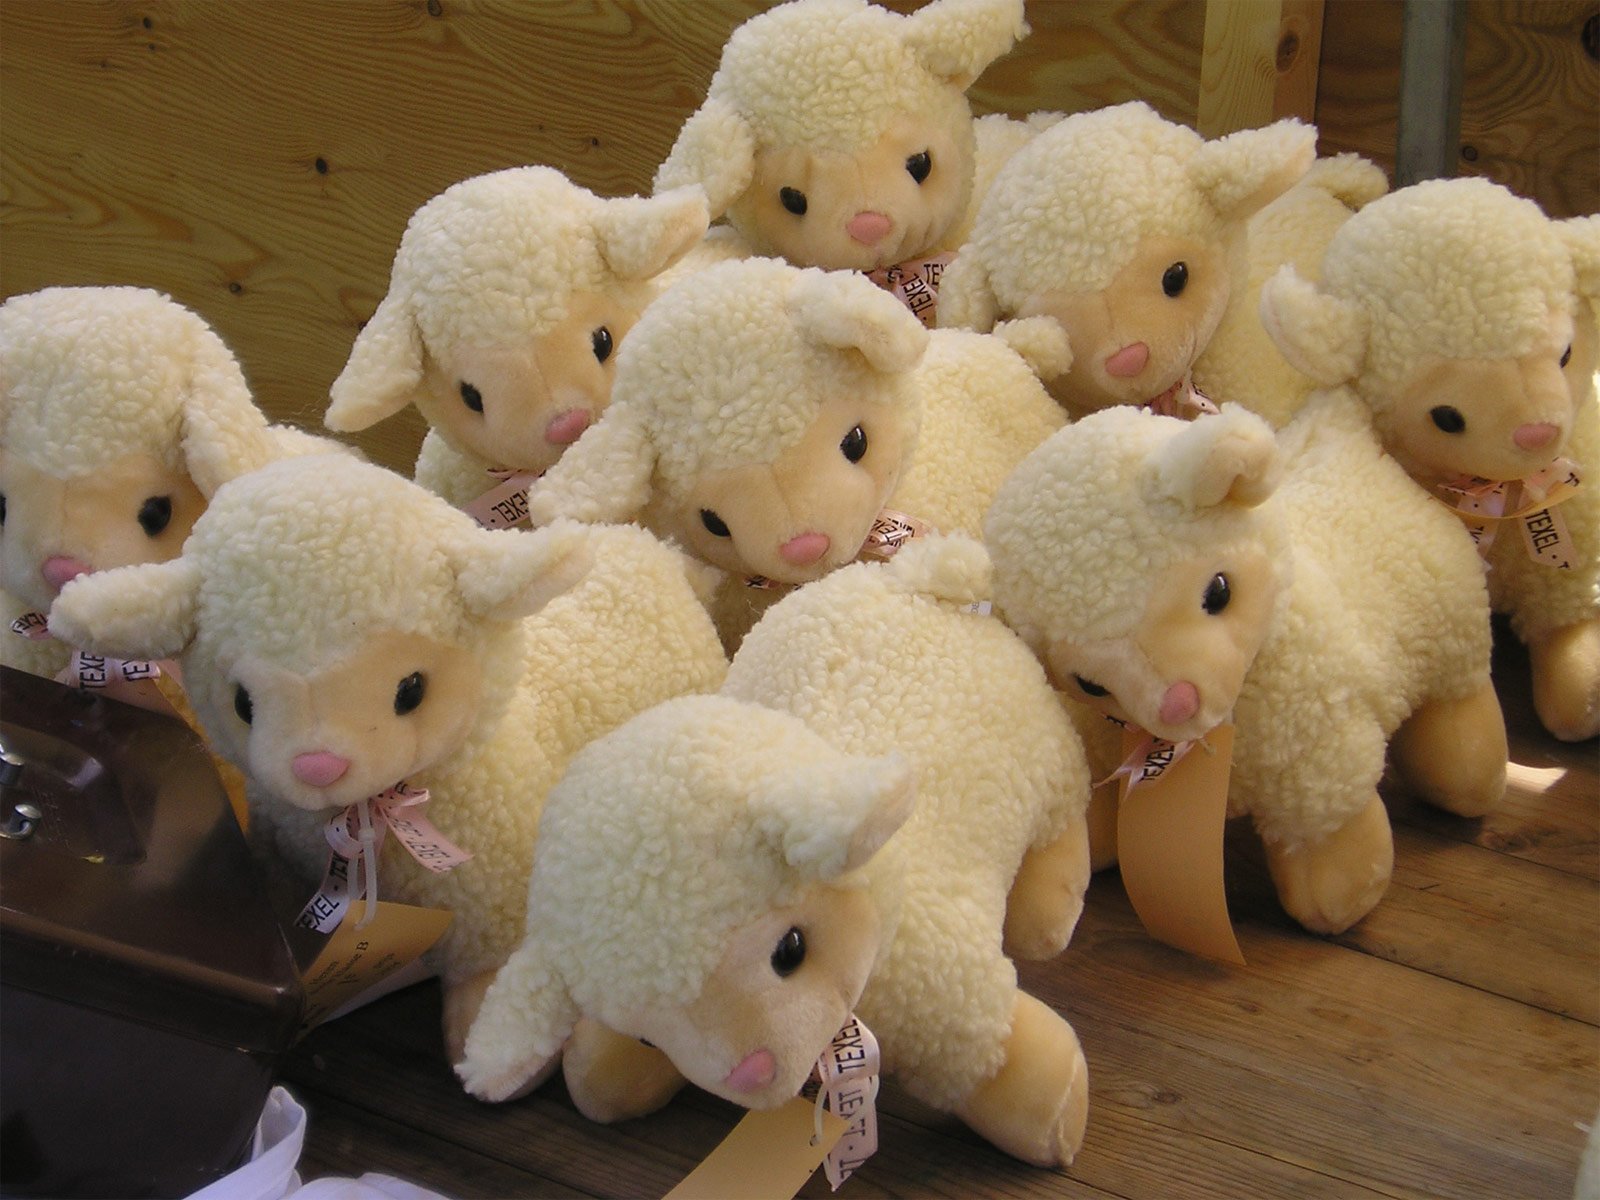 a group of teddy bears that are on display